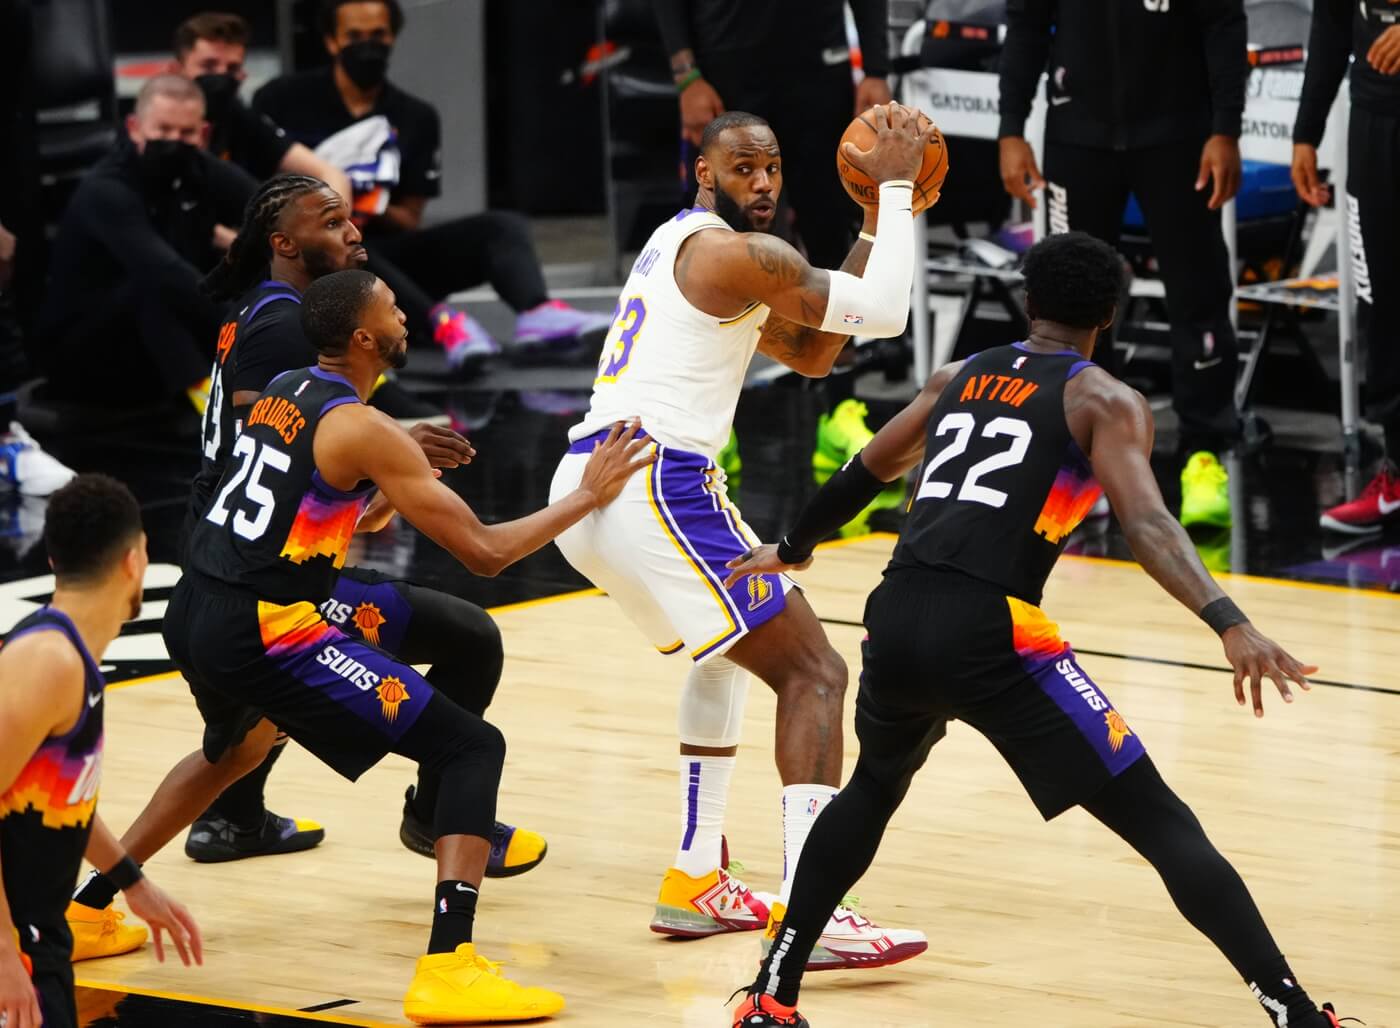 May 23, 2021; Phoenix, Arizona, USA; Los Angeles Lakers forward LeBron James (23) against the Phoenix Suns during game one in the first round of the 2021 NBA Playoffs. at Phoenix Suns Arena